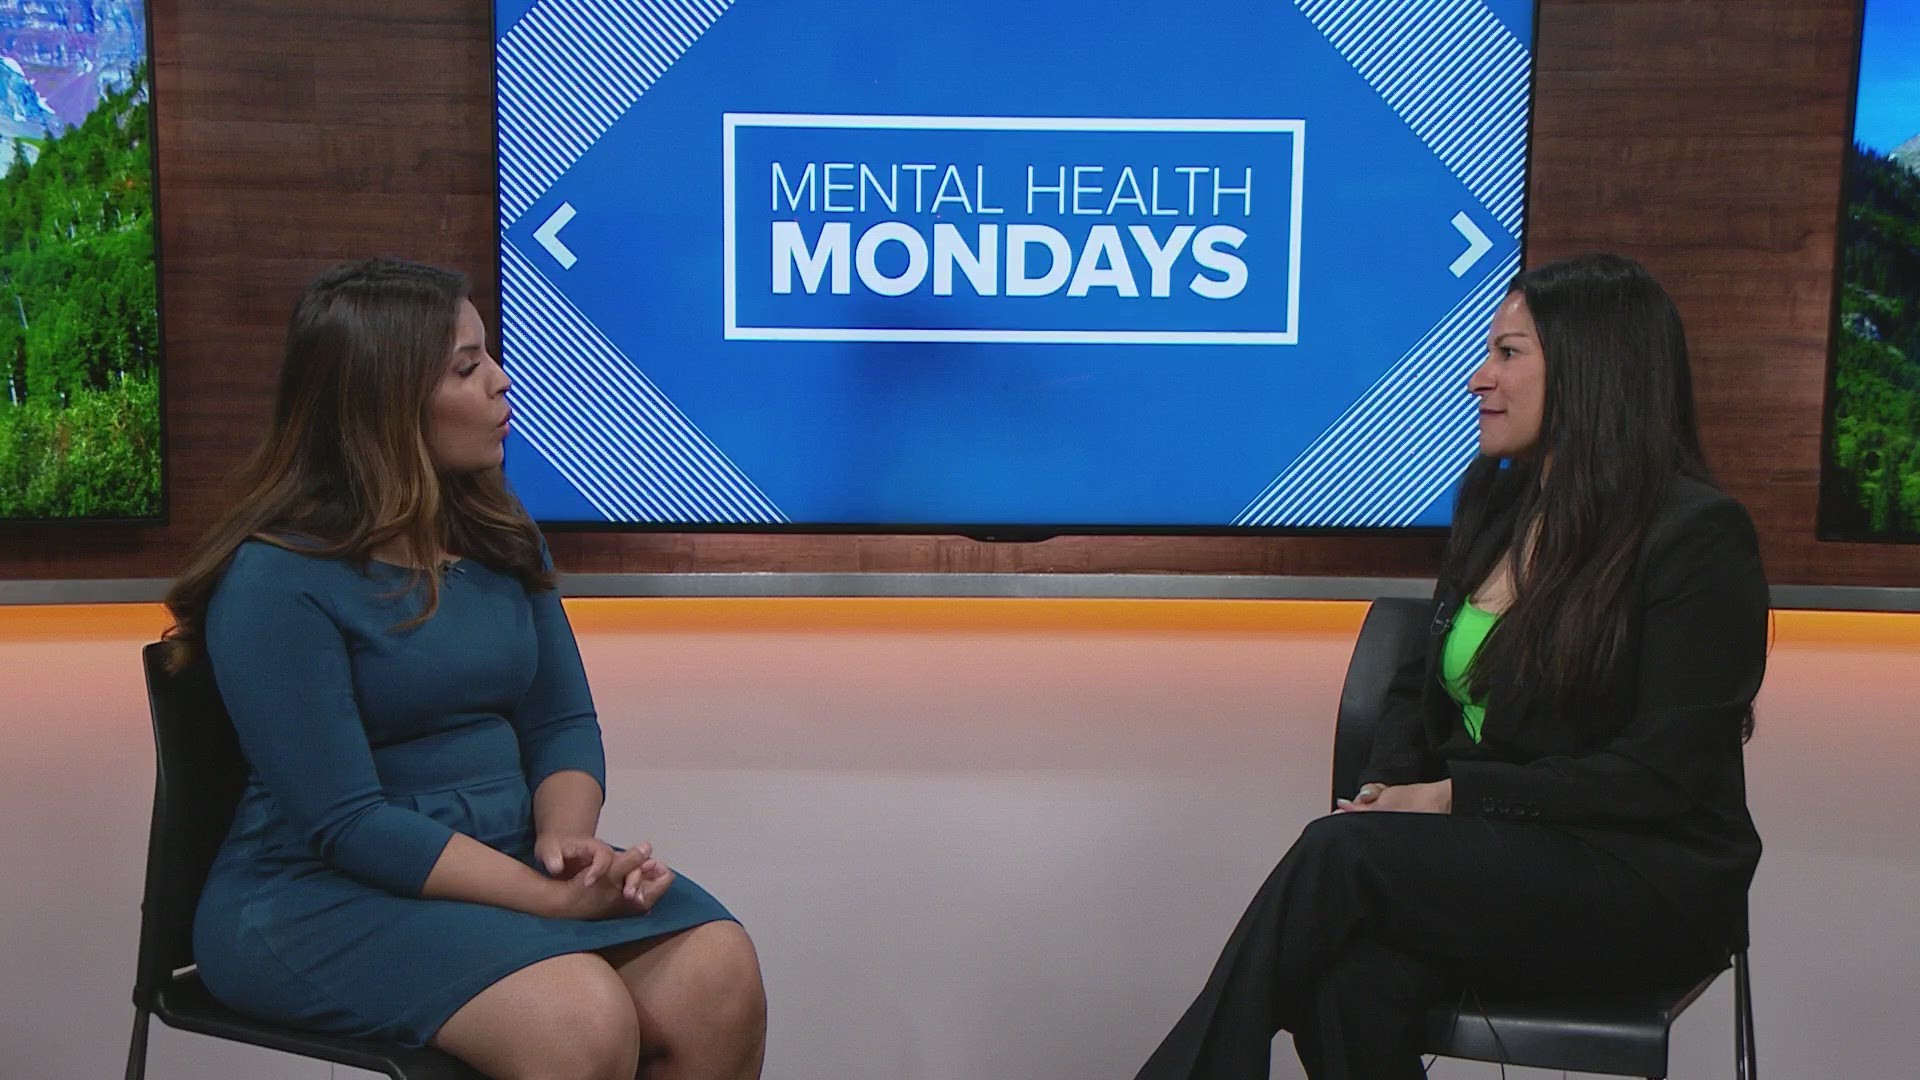 The anxiety that comes with managing finances can have a negative impact on mental health. Dr. Sheryl Ziegler offers tips to help mange stress relate to money.